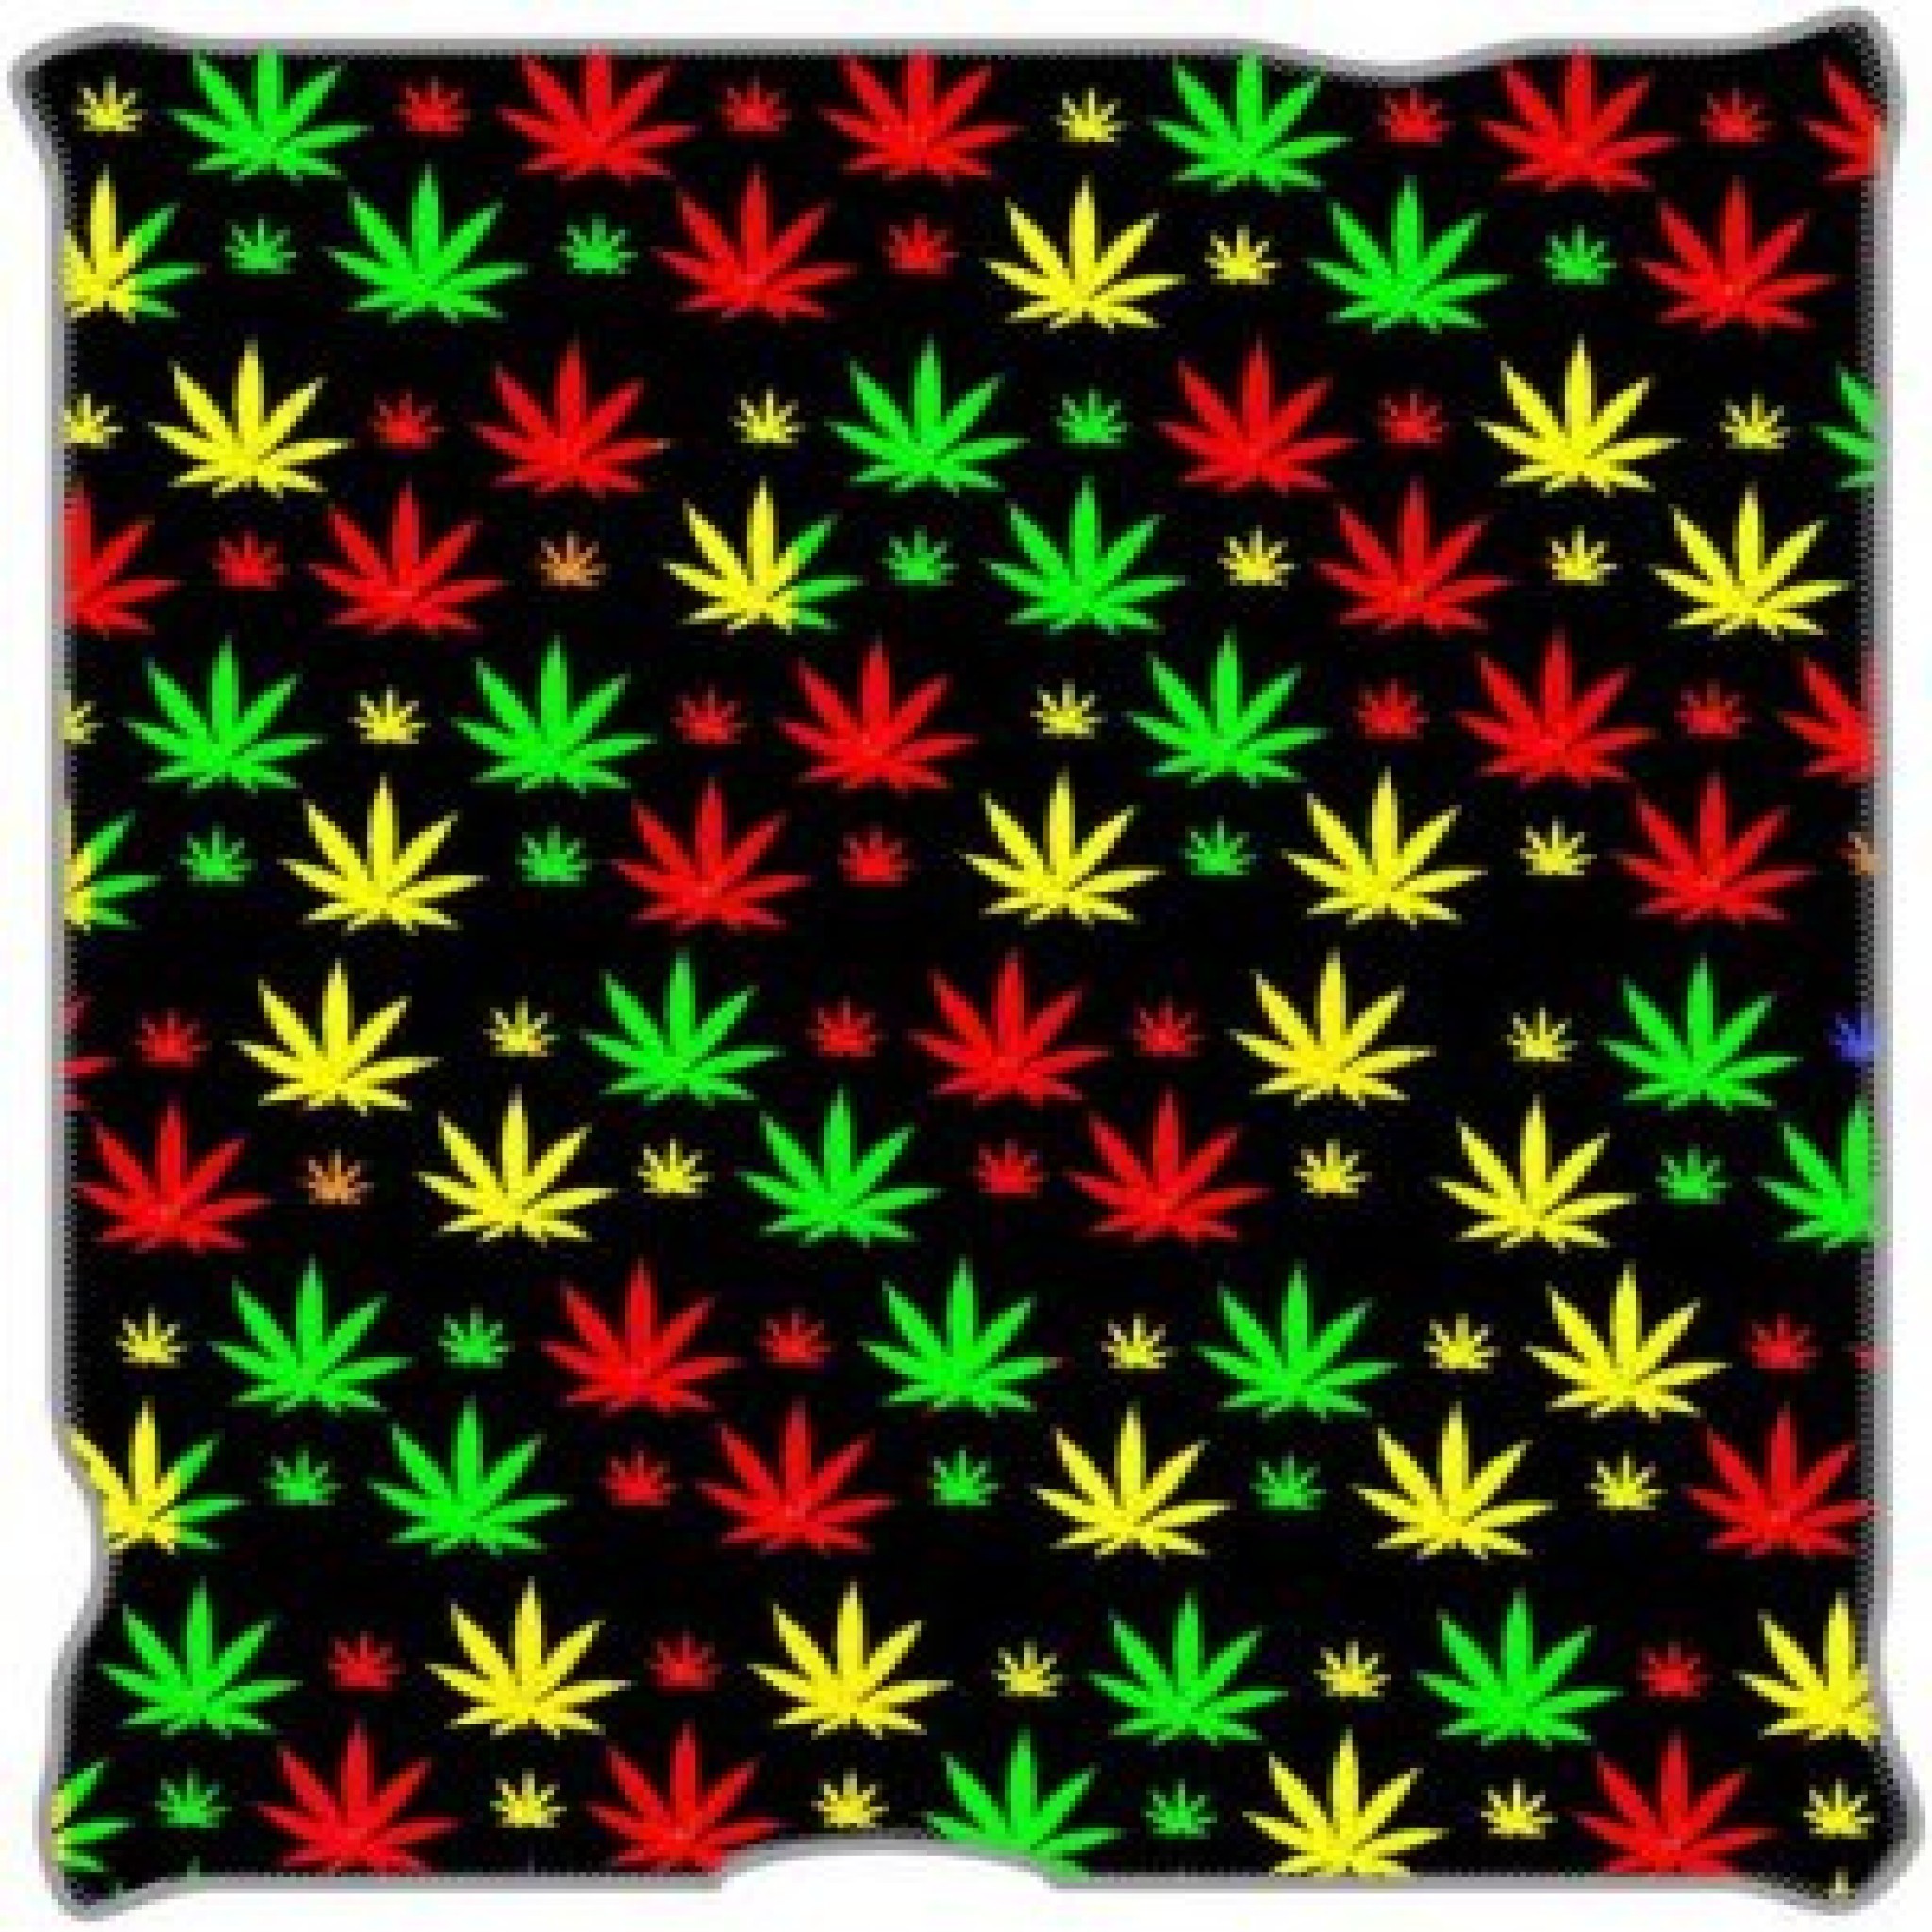 50 Best images about Weed on Pinterest | Cannabis, Marijuana .